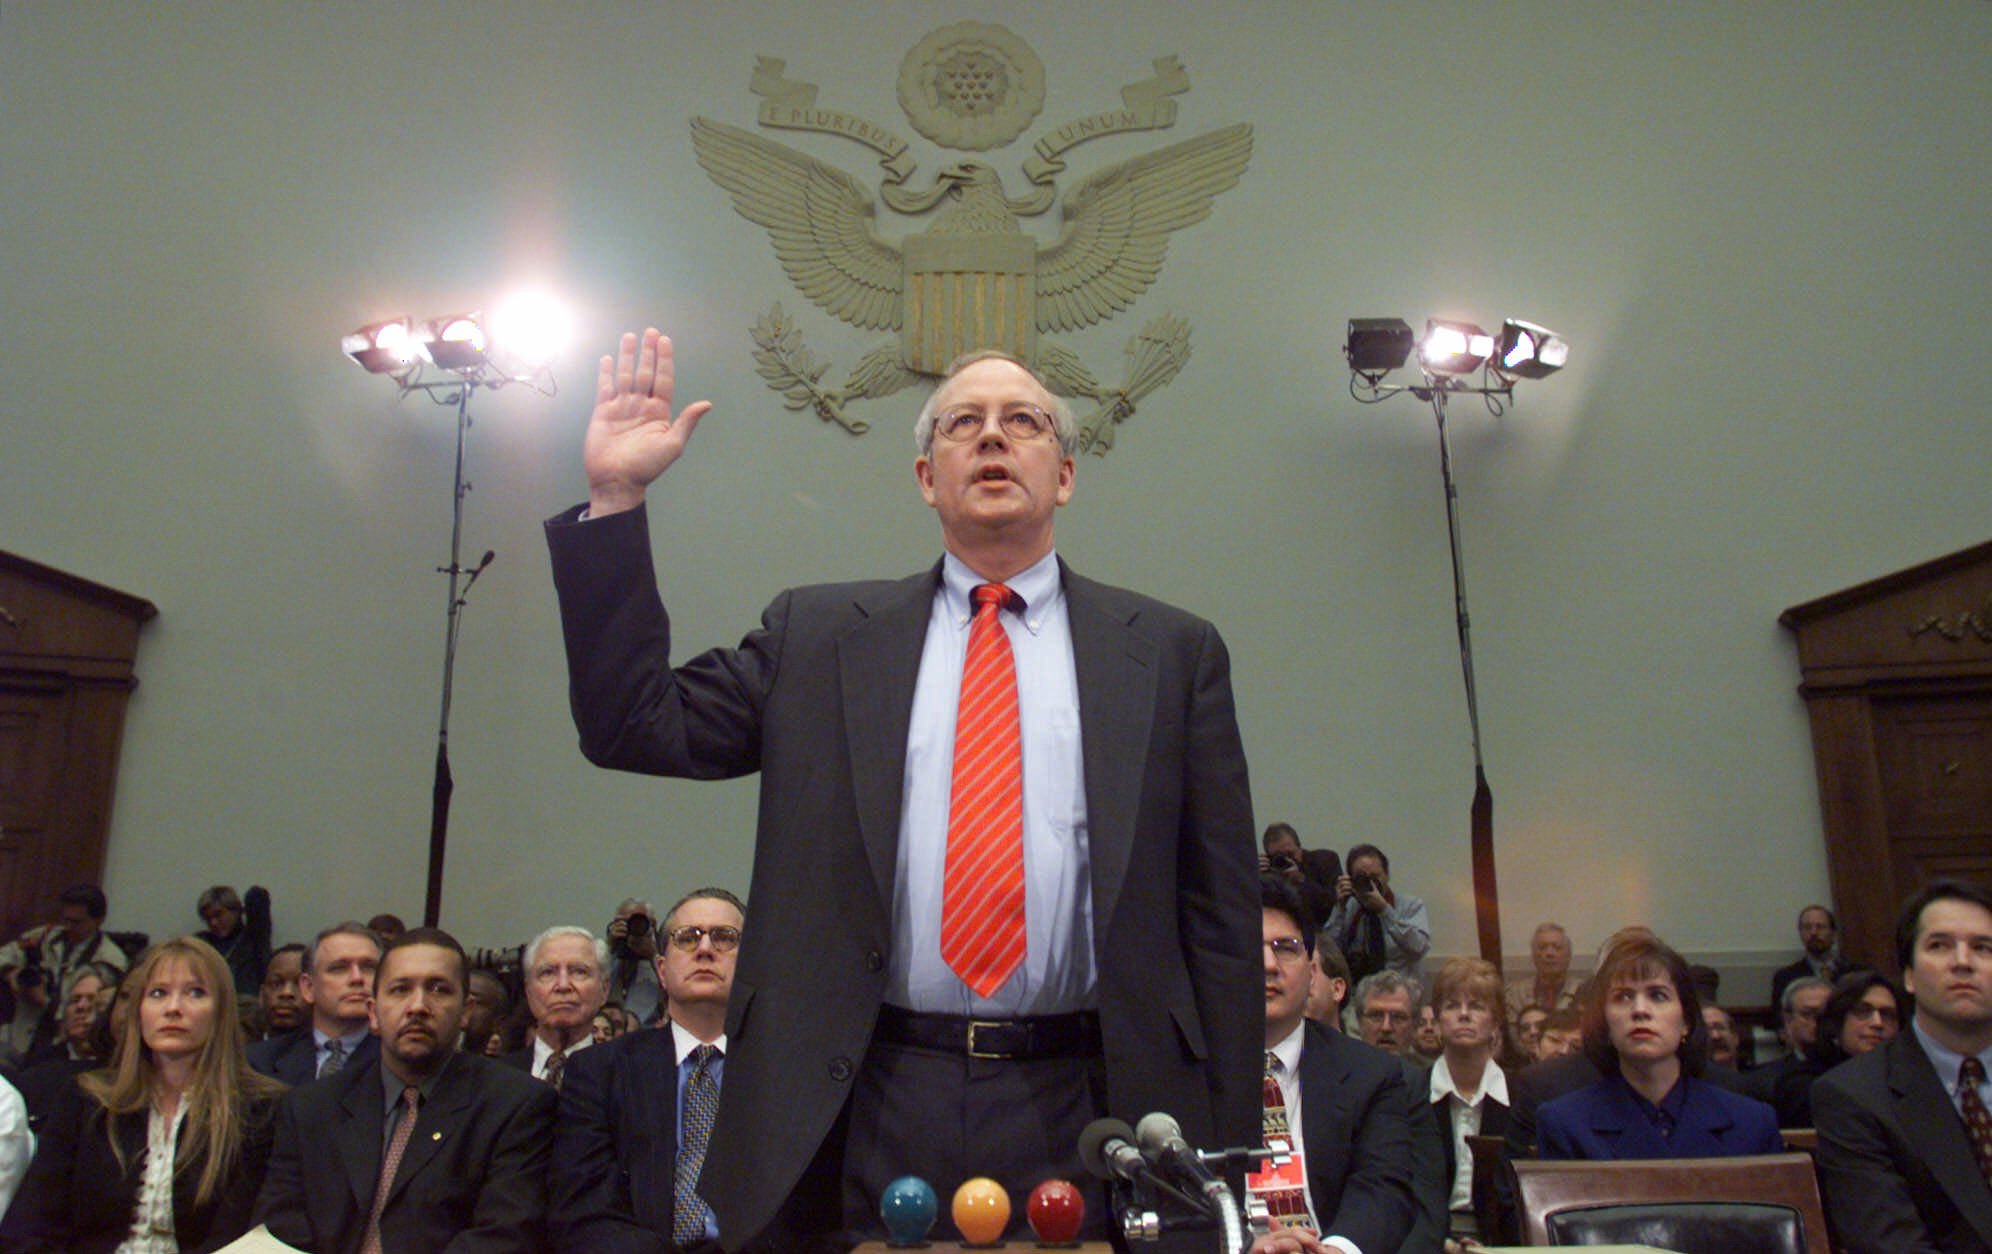 PHOTO: Independent Counsel Kenneth Starr is sworn in on Capitol Hill, Nov. 19, 1998, prior to testifying before the House Judiciary Committee's impeachment hearing.